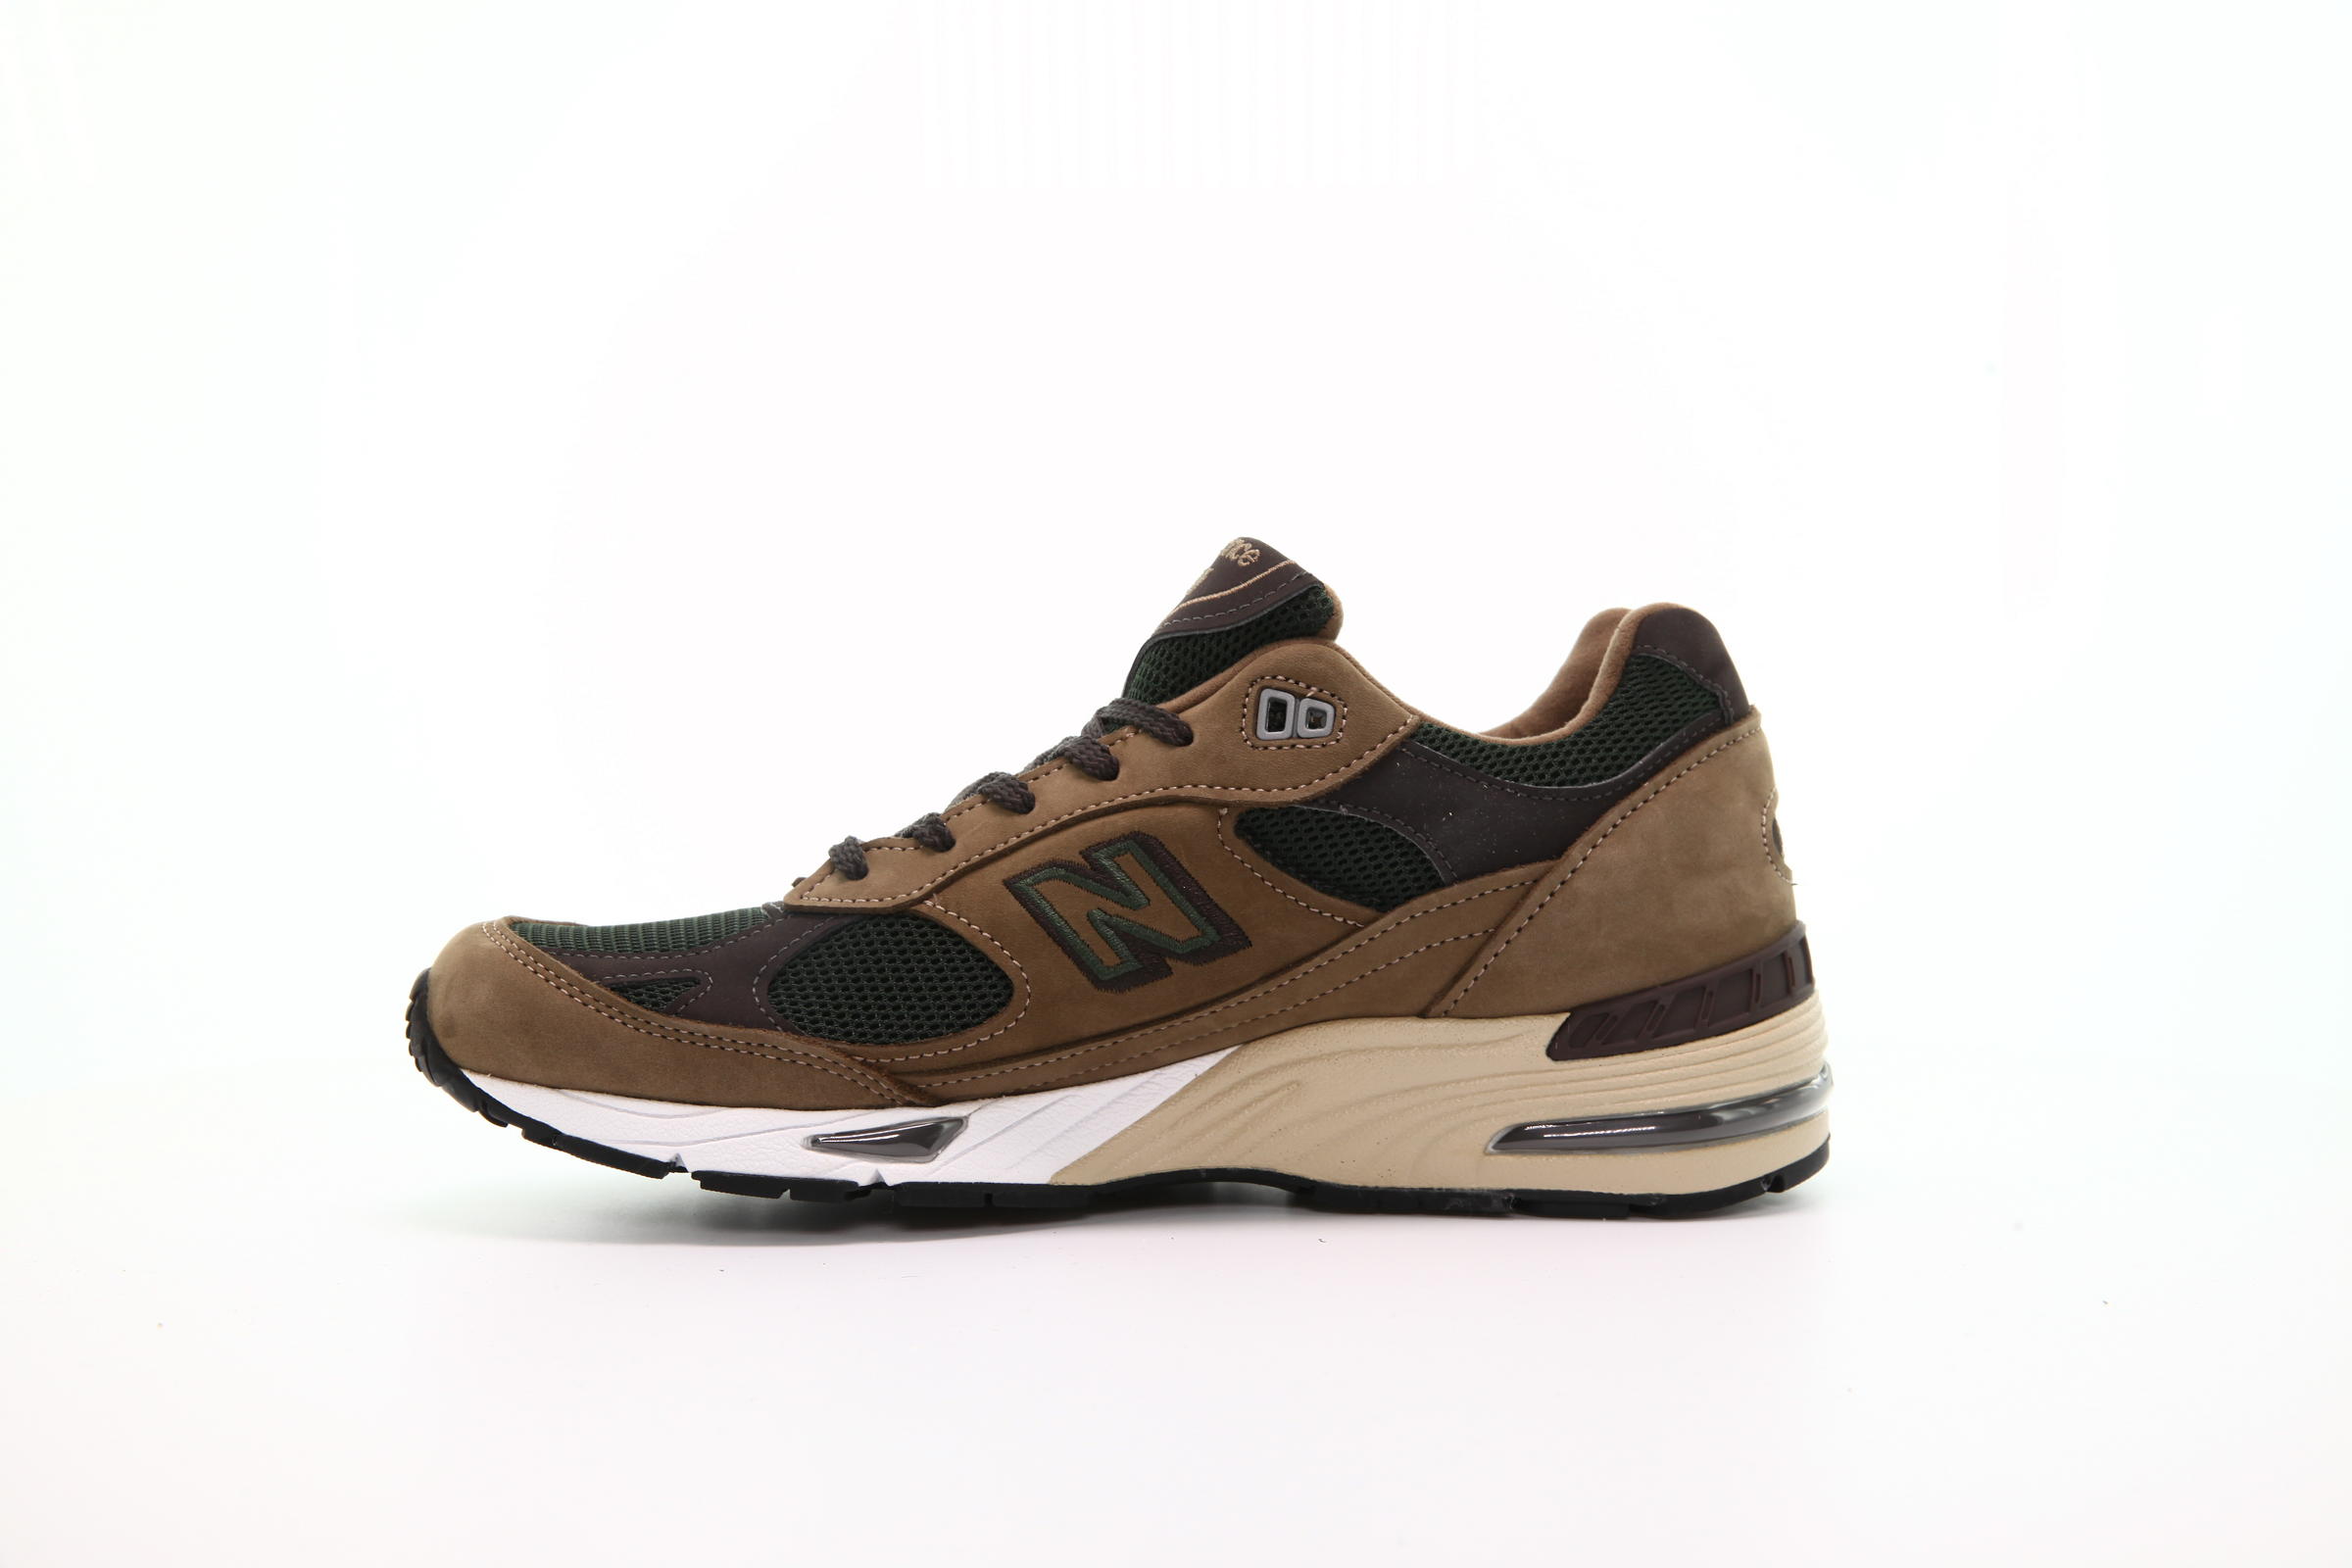 New Balance M 991 AEF "Made in England"